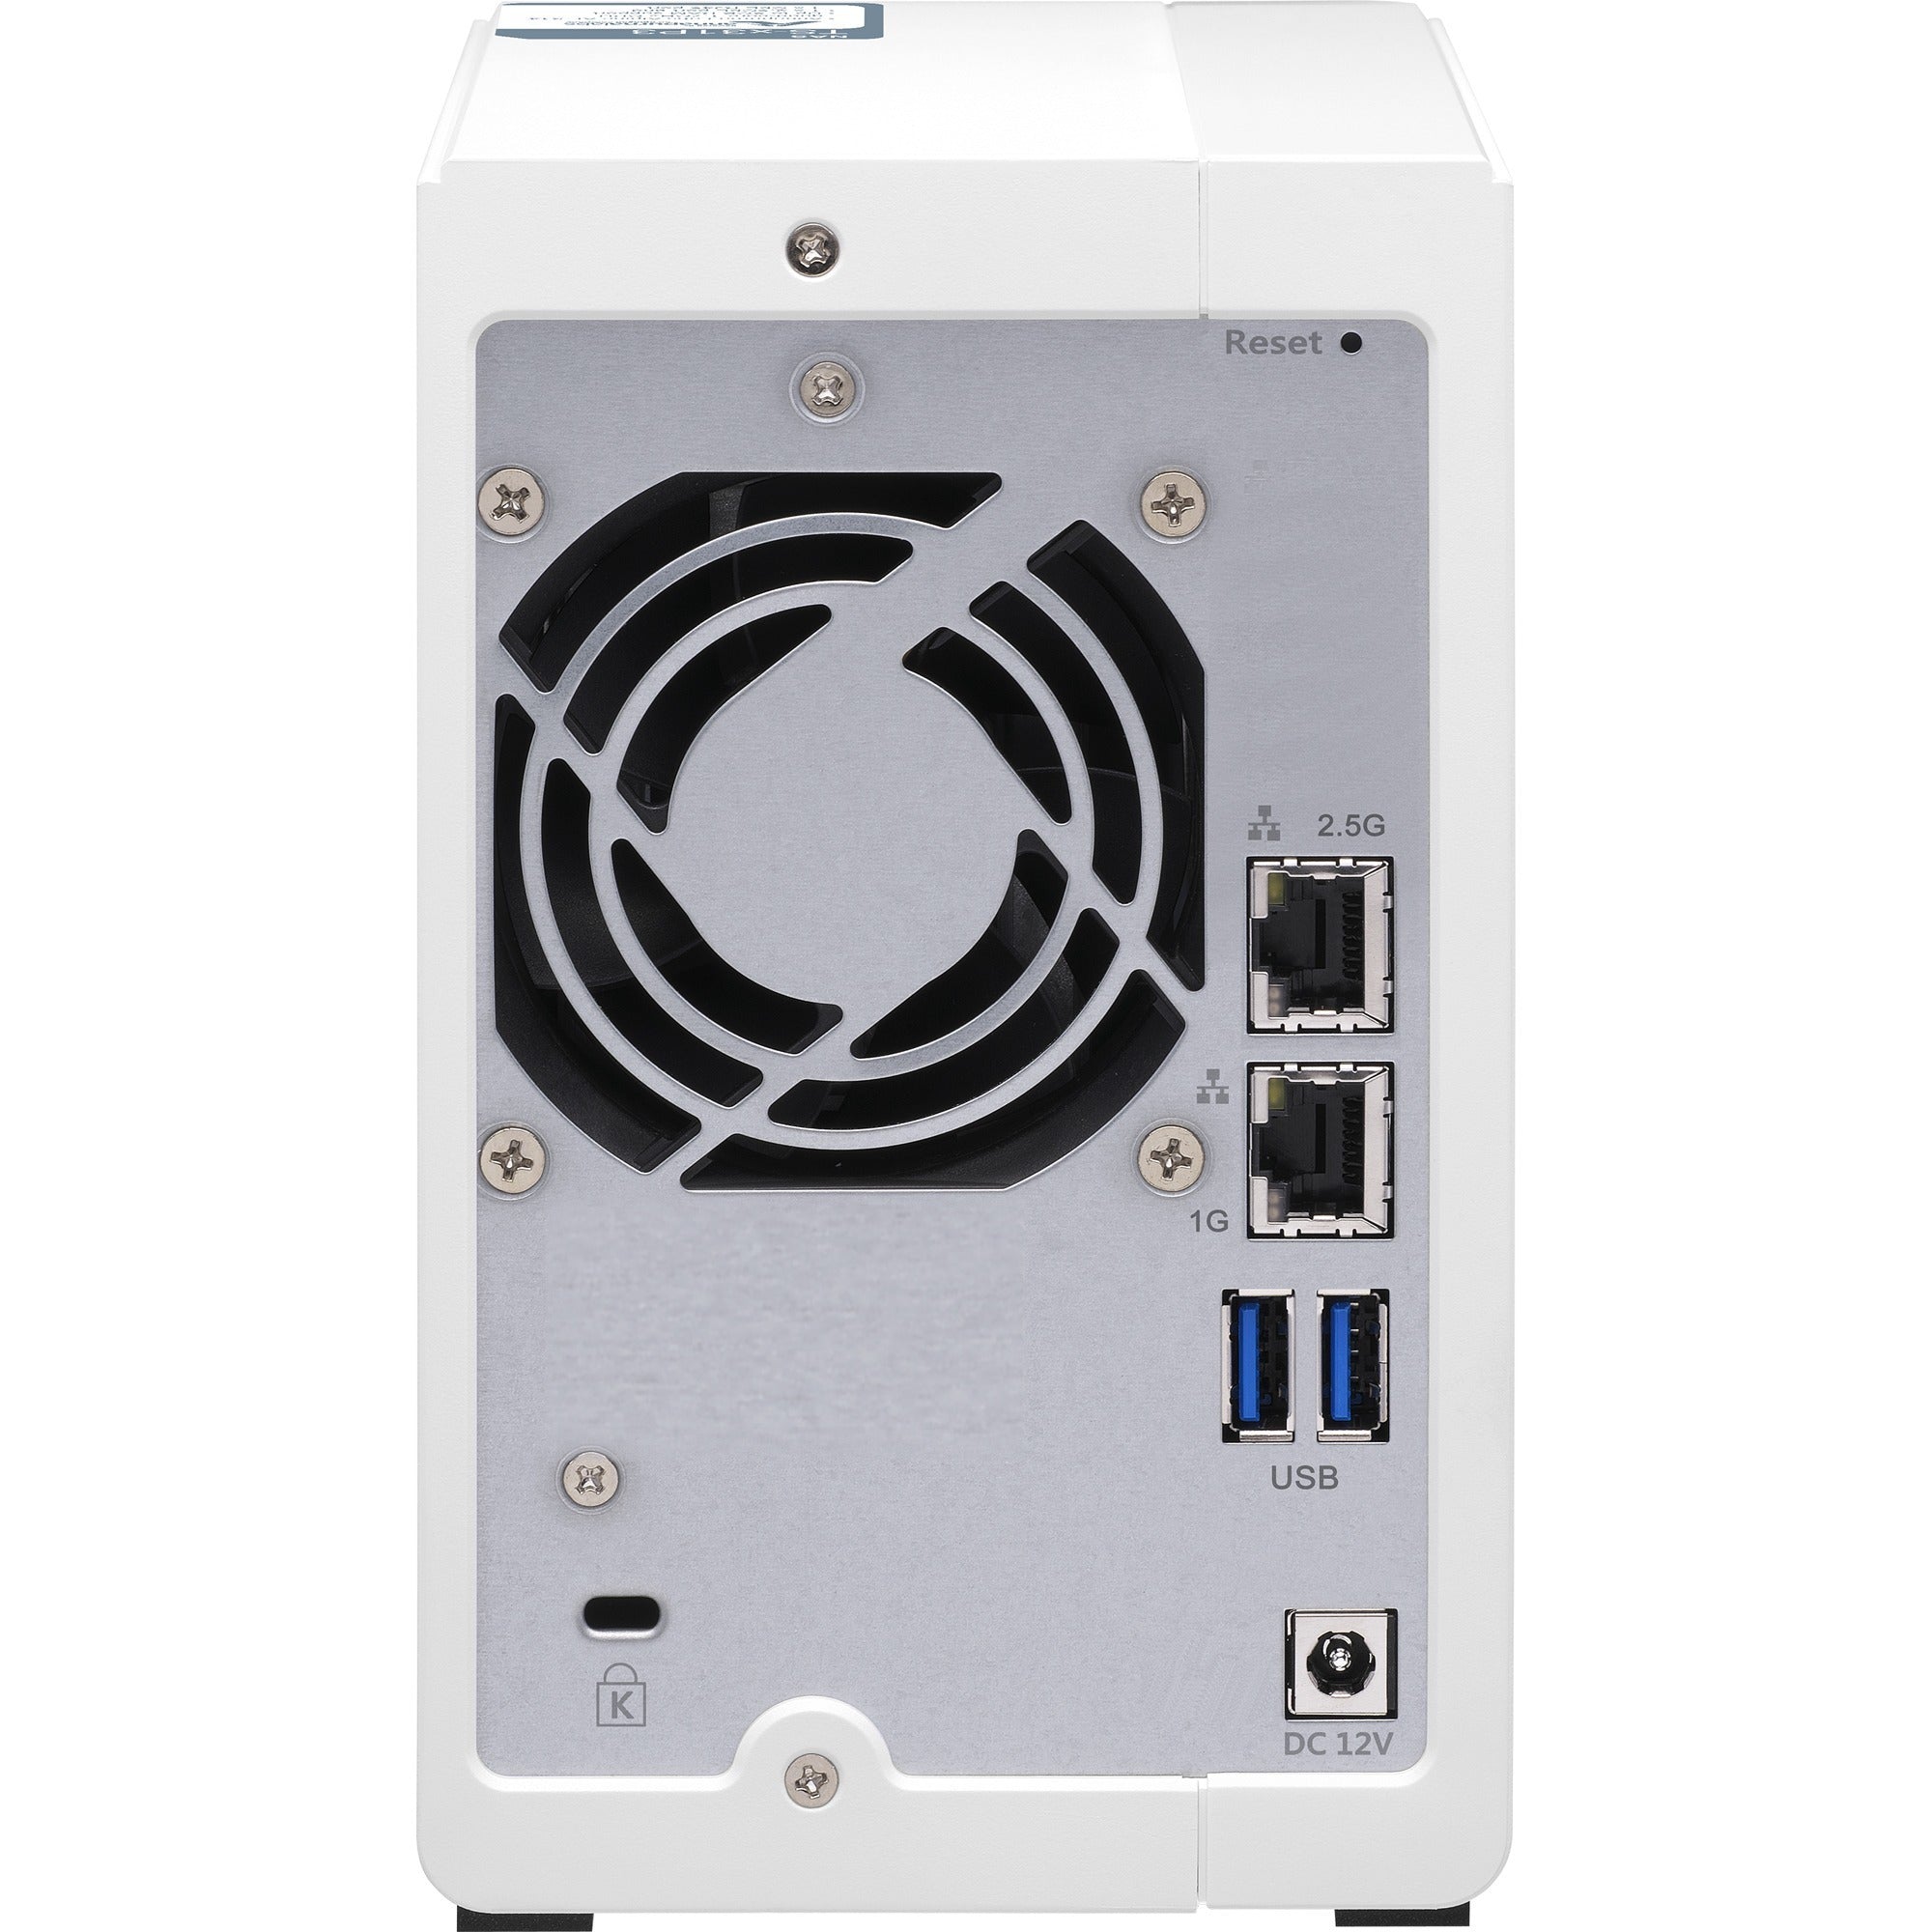 QNAP Quad-core 1.7GHz NAS with 2.5GbE and Feature-rich